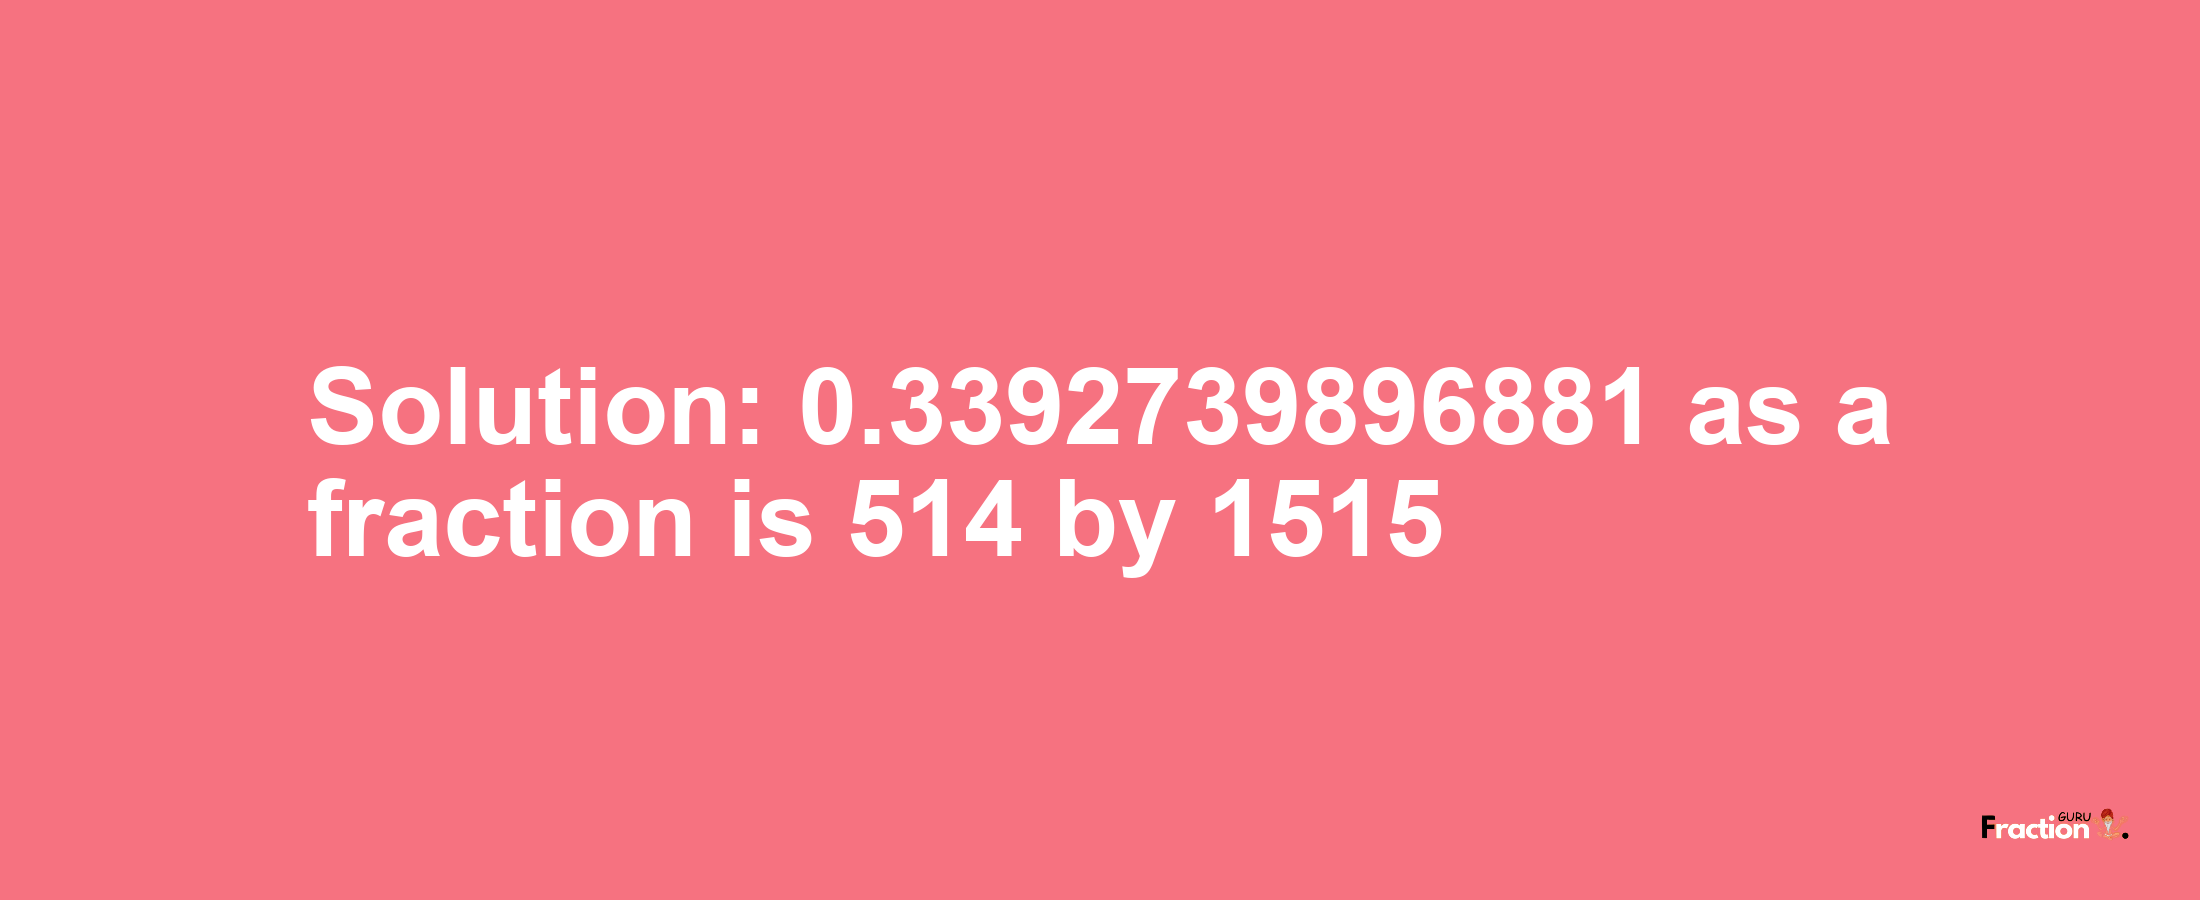 Solution:0.3392739896881 as a fraction is 514/1515